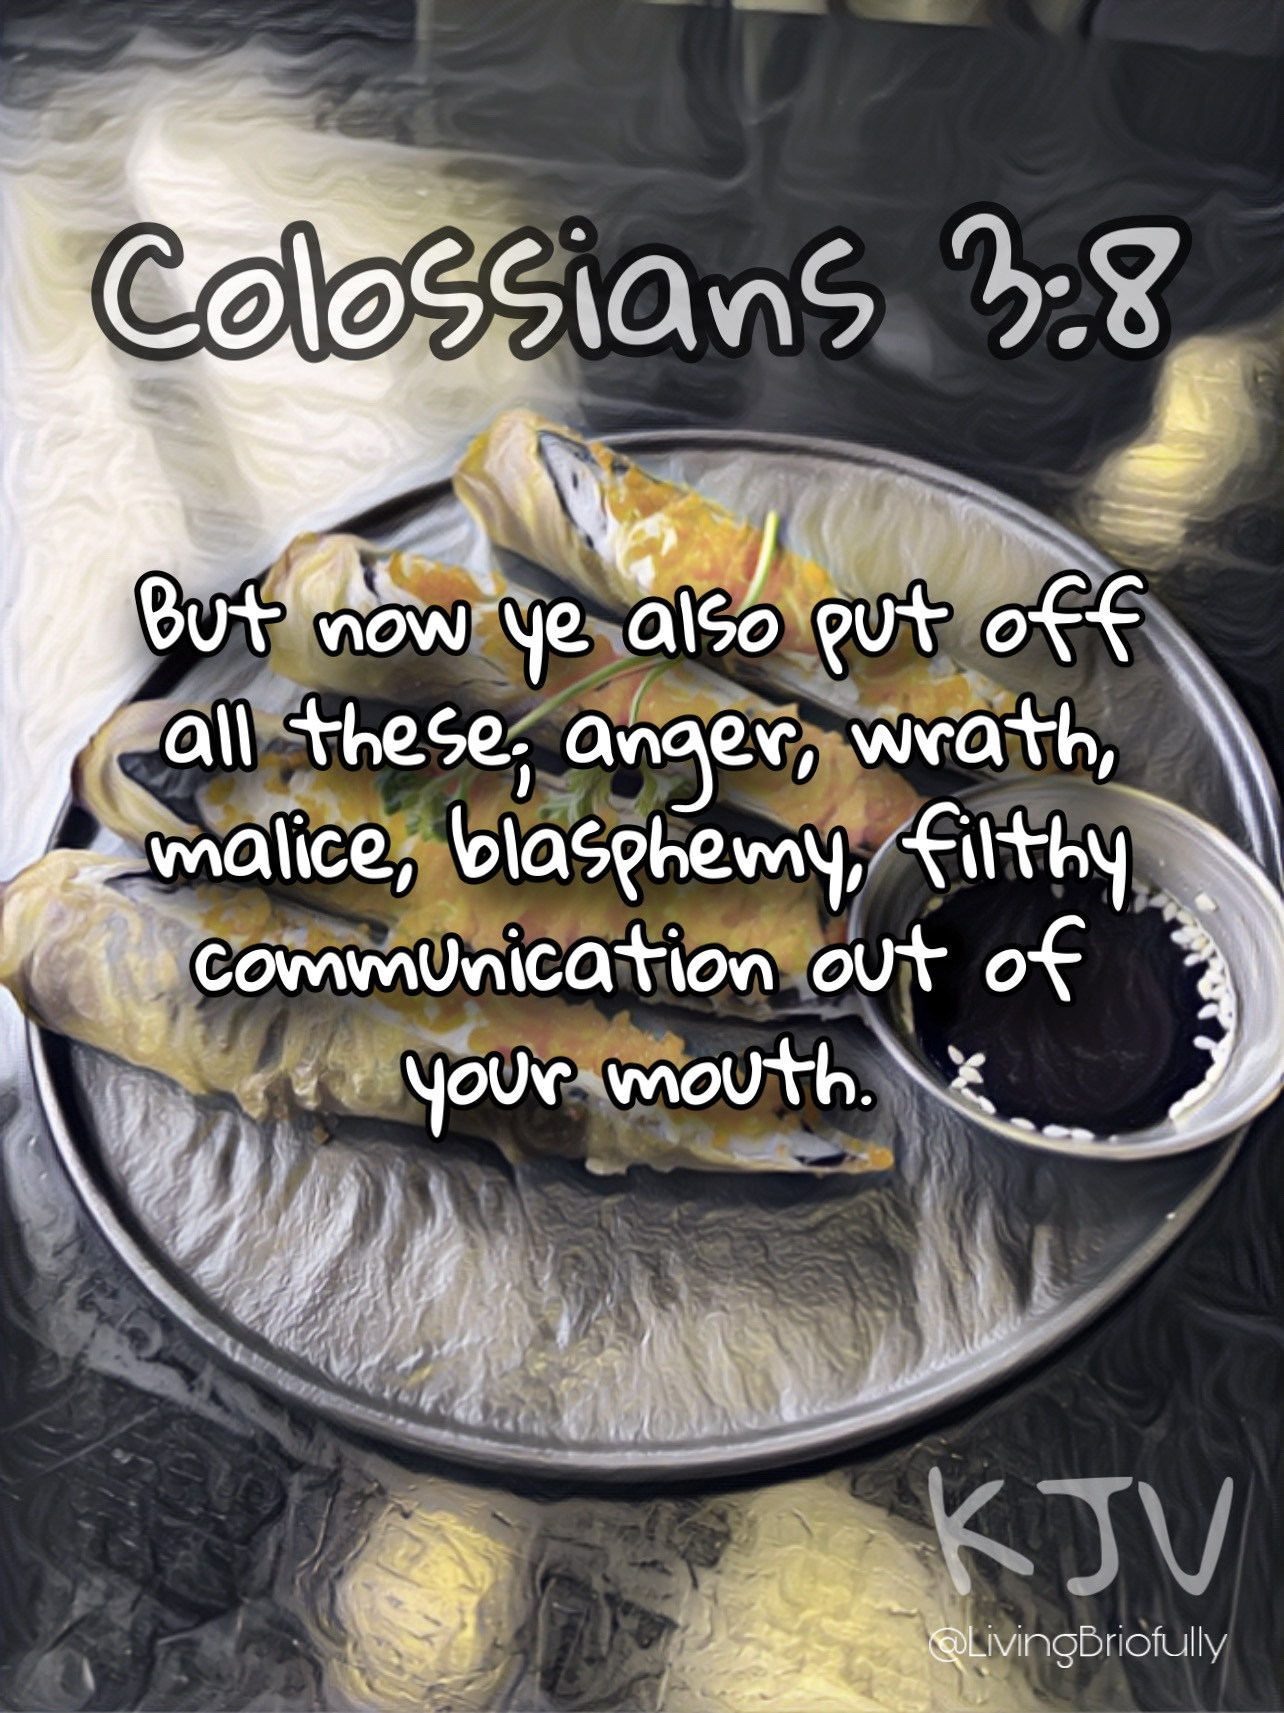 "But now ye also put off all these; anger, wrath, malice, blasphemy, filthy communication out of your mouth." Colossians 3:8 KJV